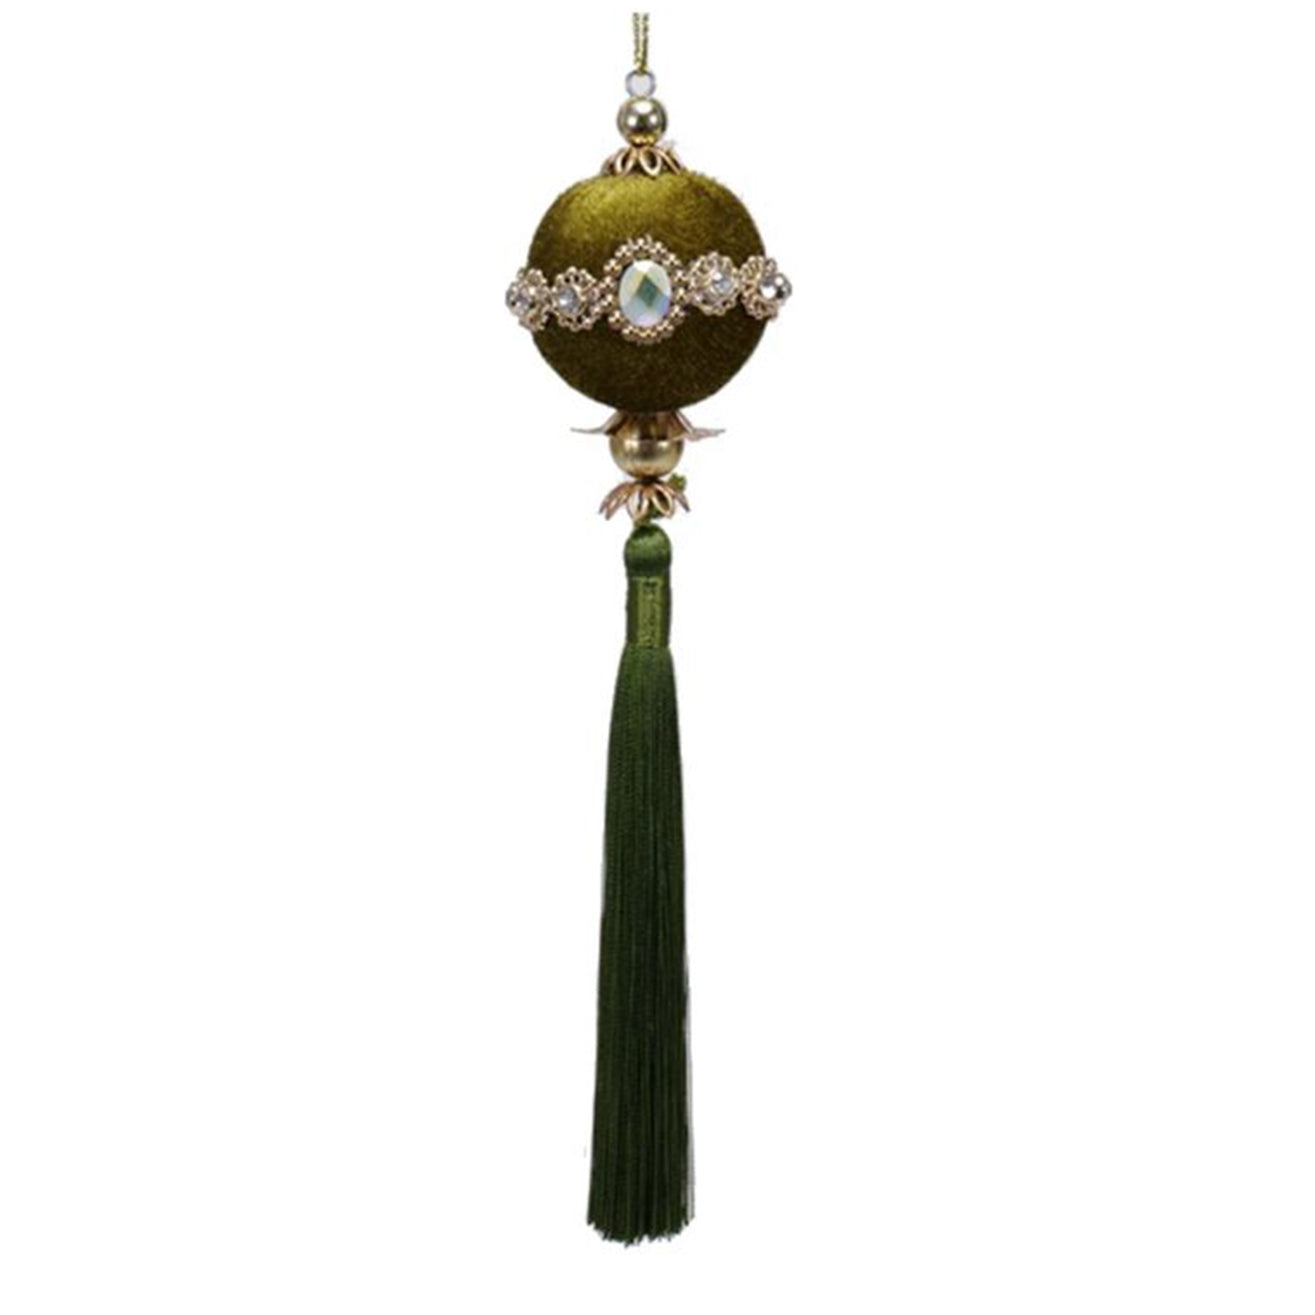 Small Ball with Tassel Ornament